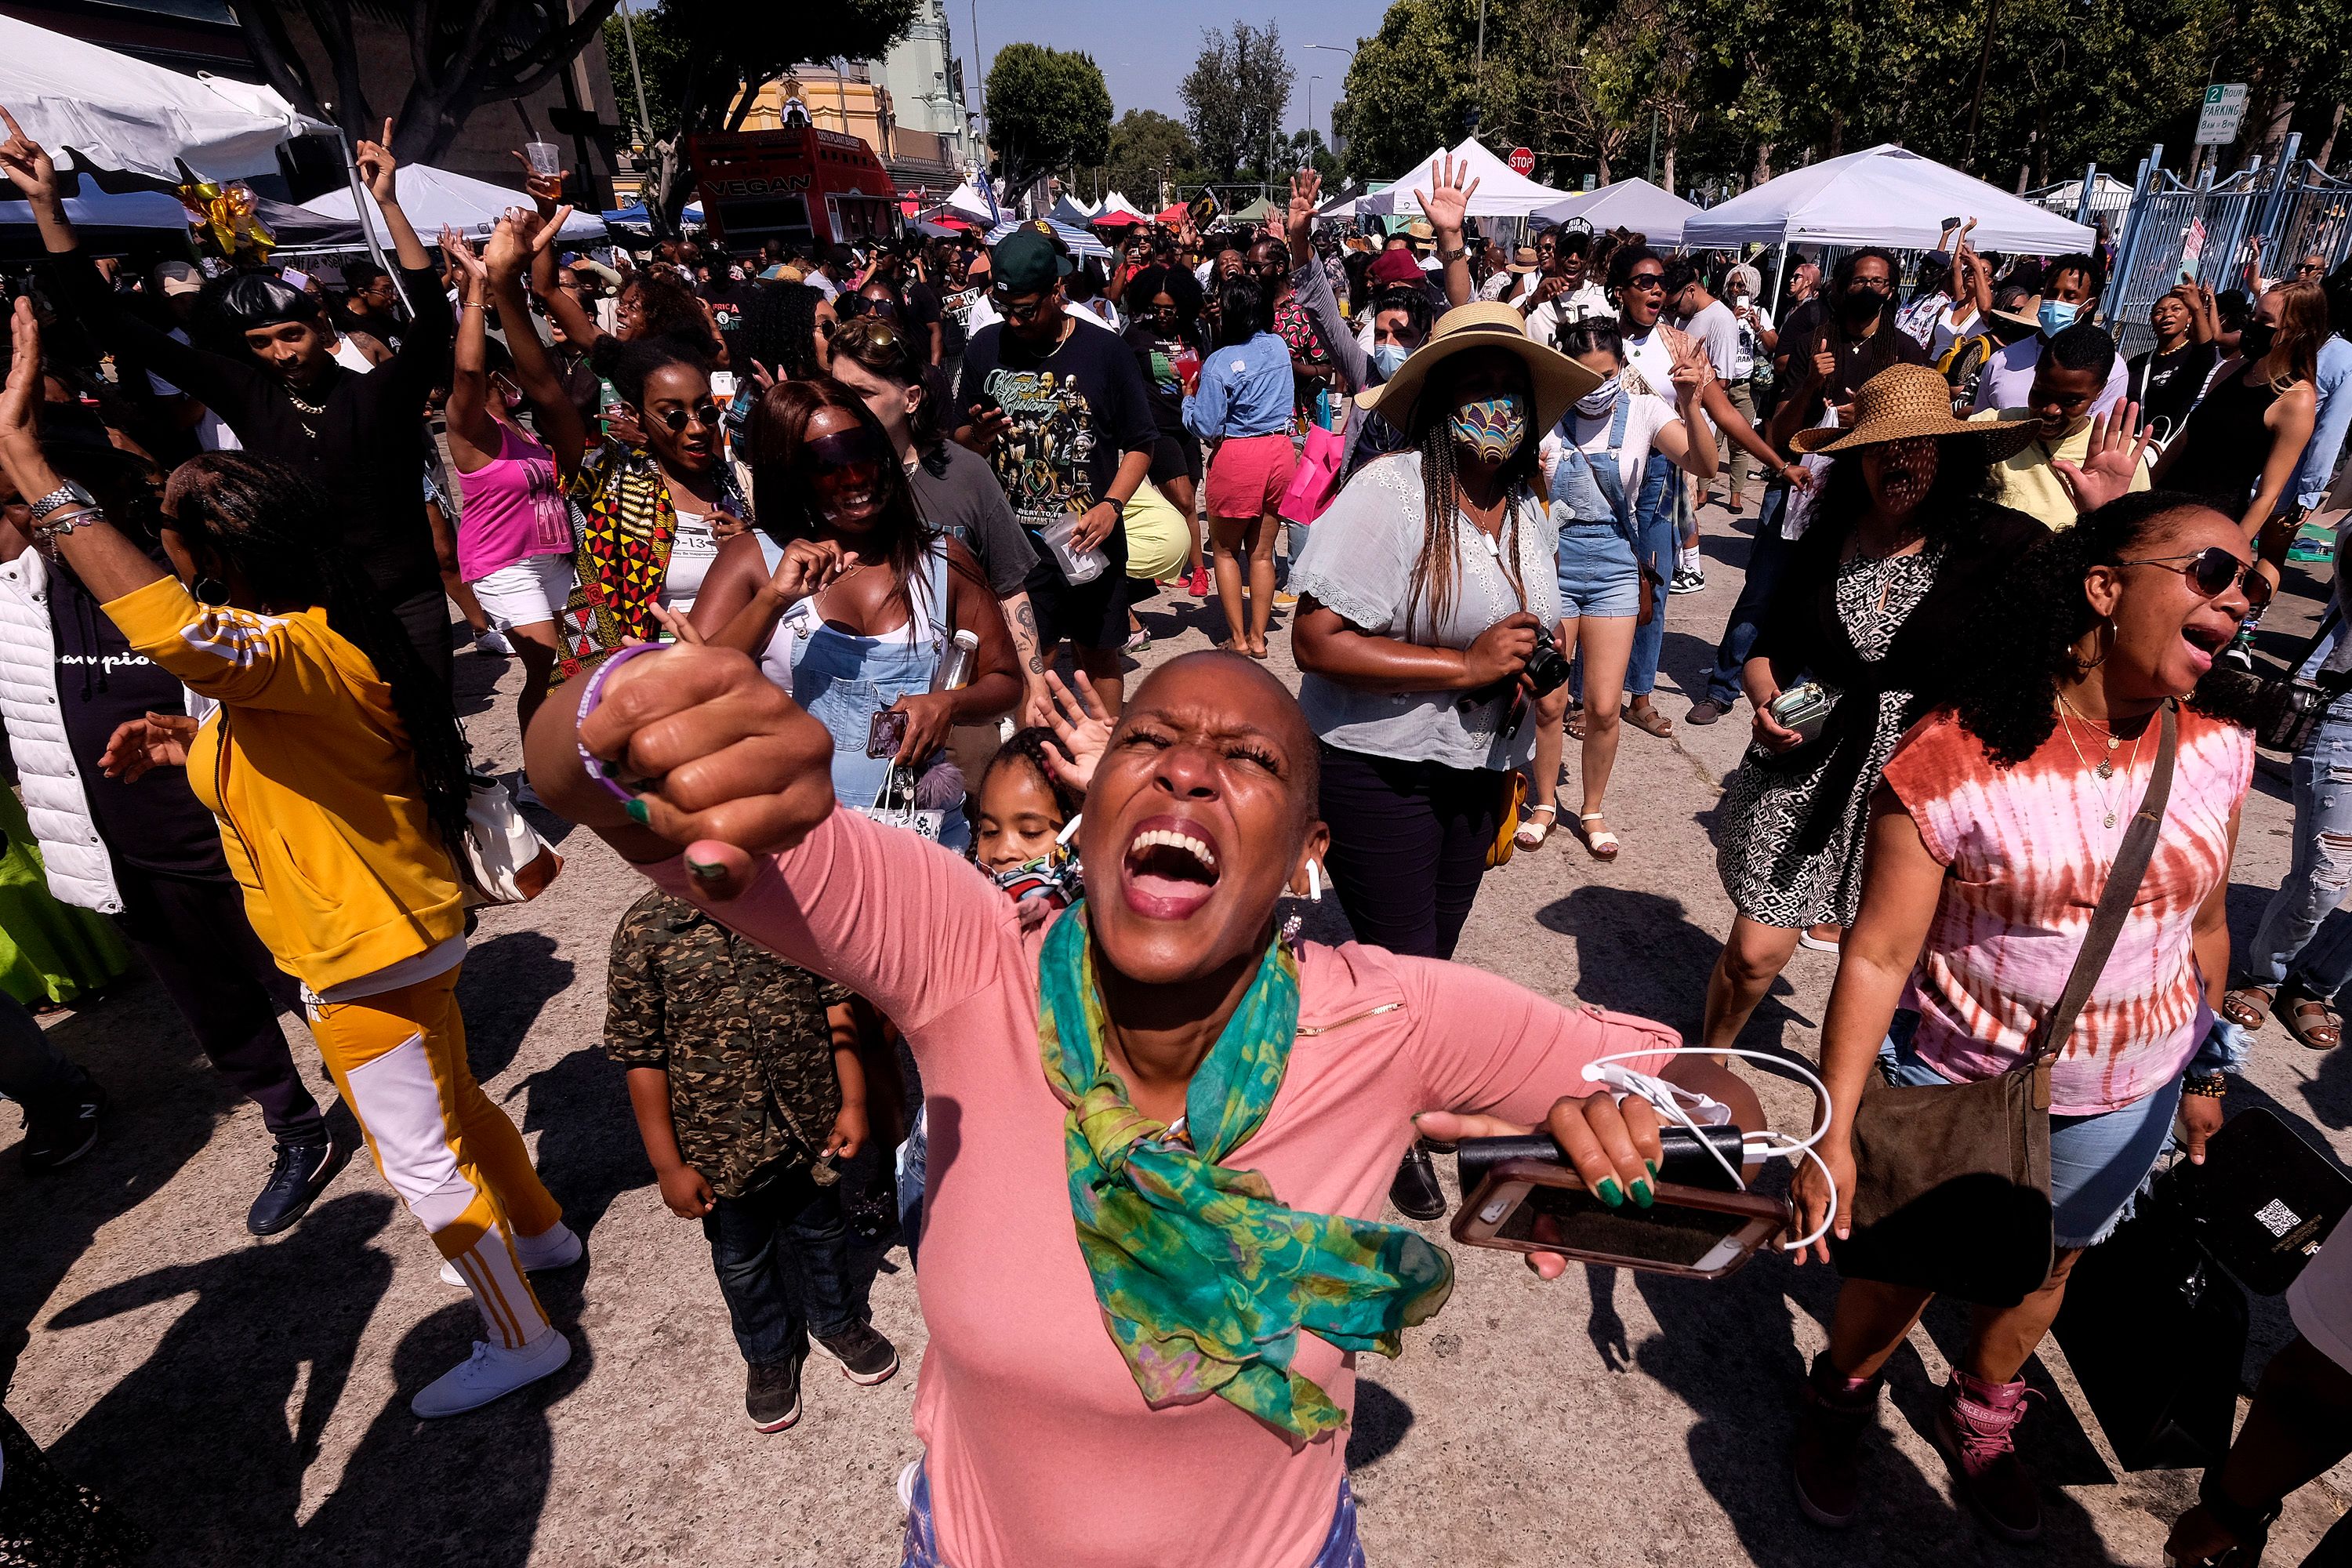 People dance during a Juneteenth commemoration at Leimert Park Plaza on Saturday, June 19, in Los Angeles.